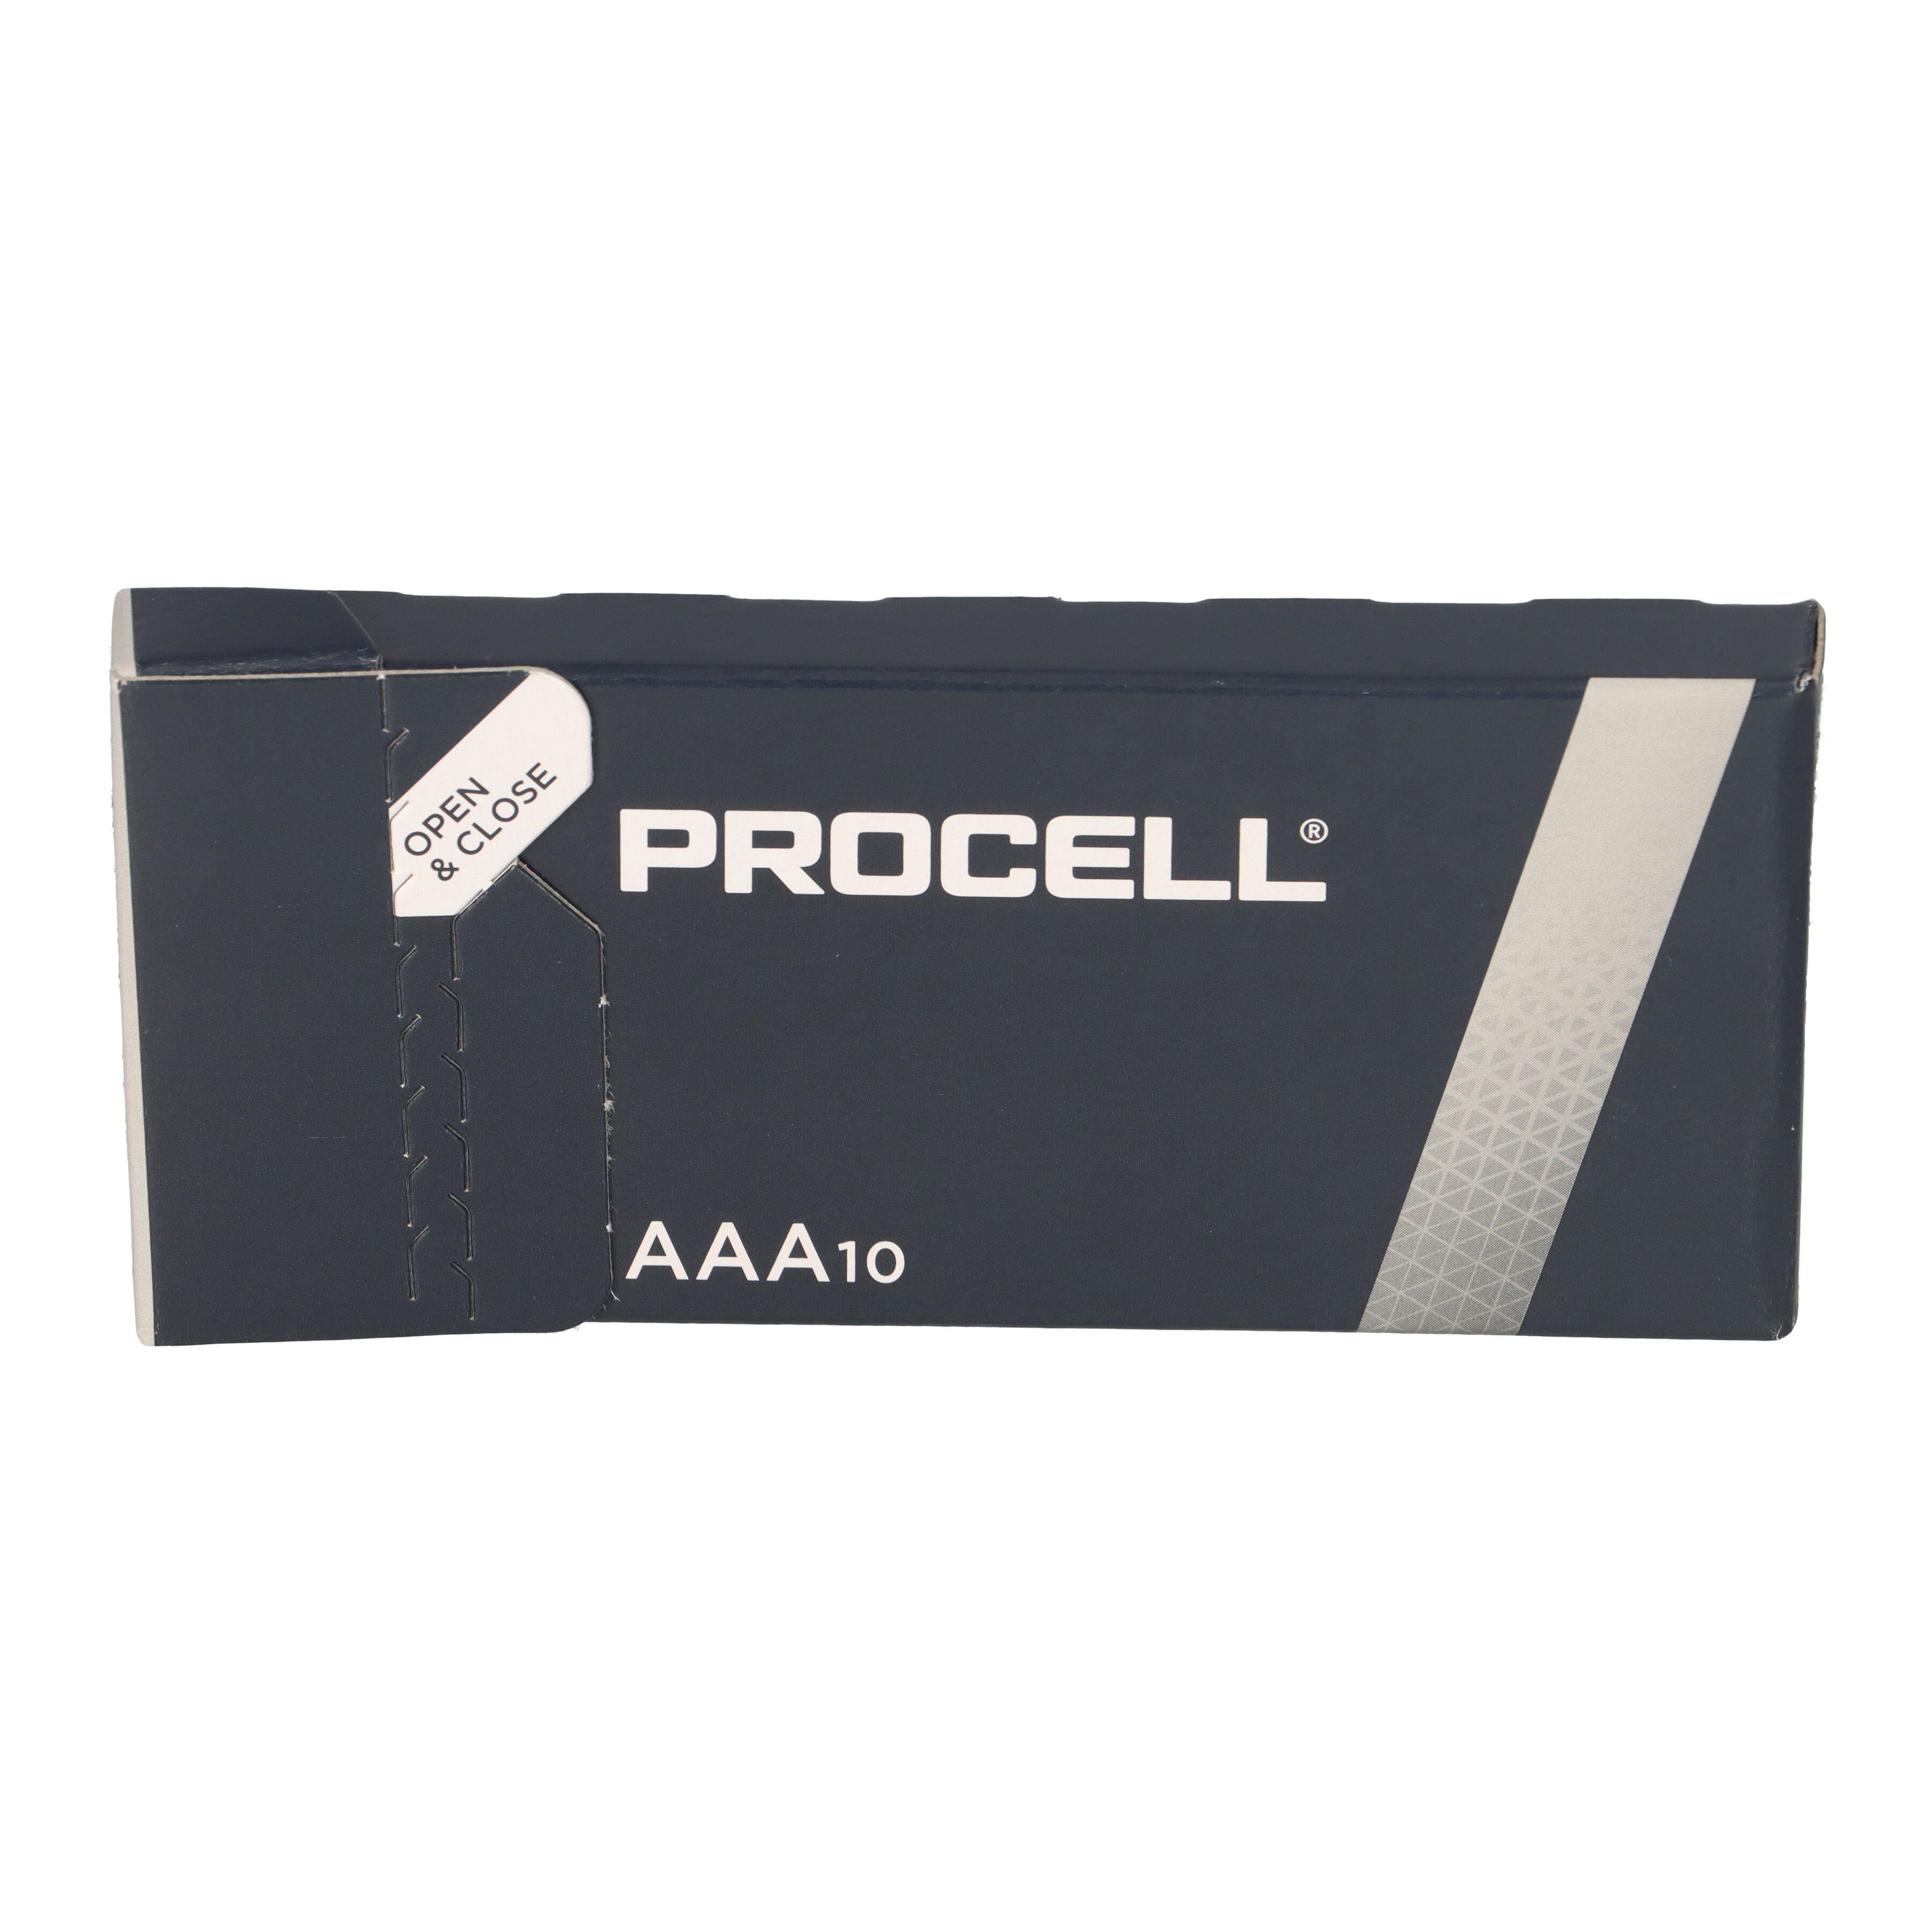 MN2400 Procell Batterie Batterie 50x Duracell AAA Micro